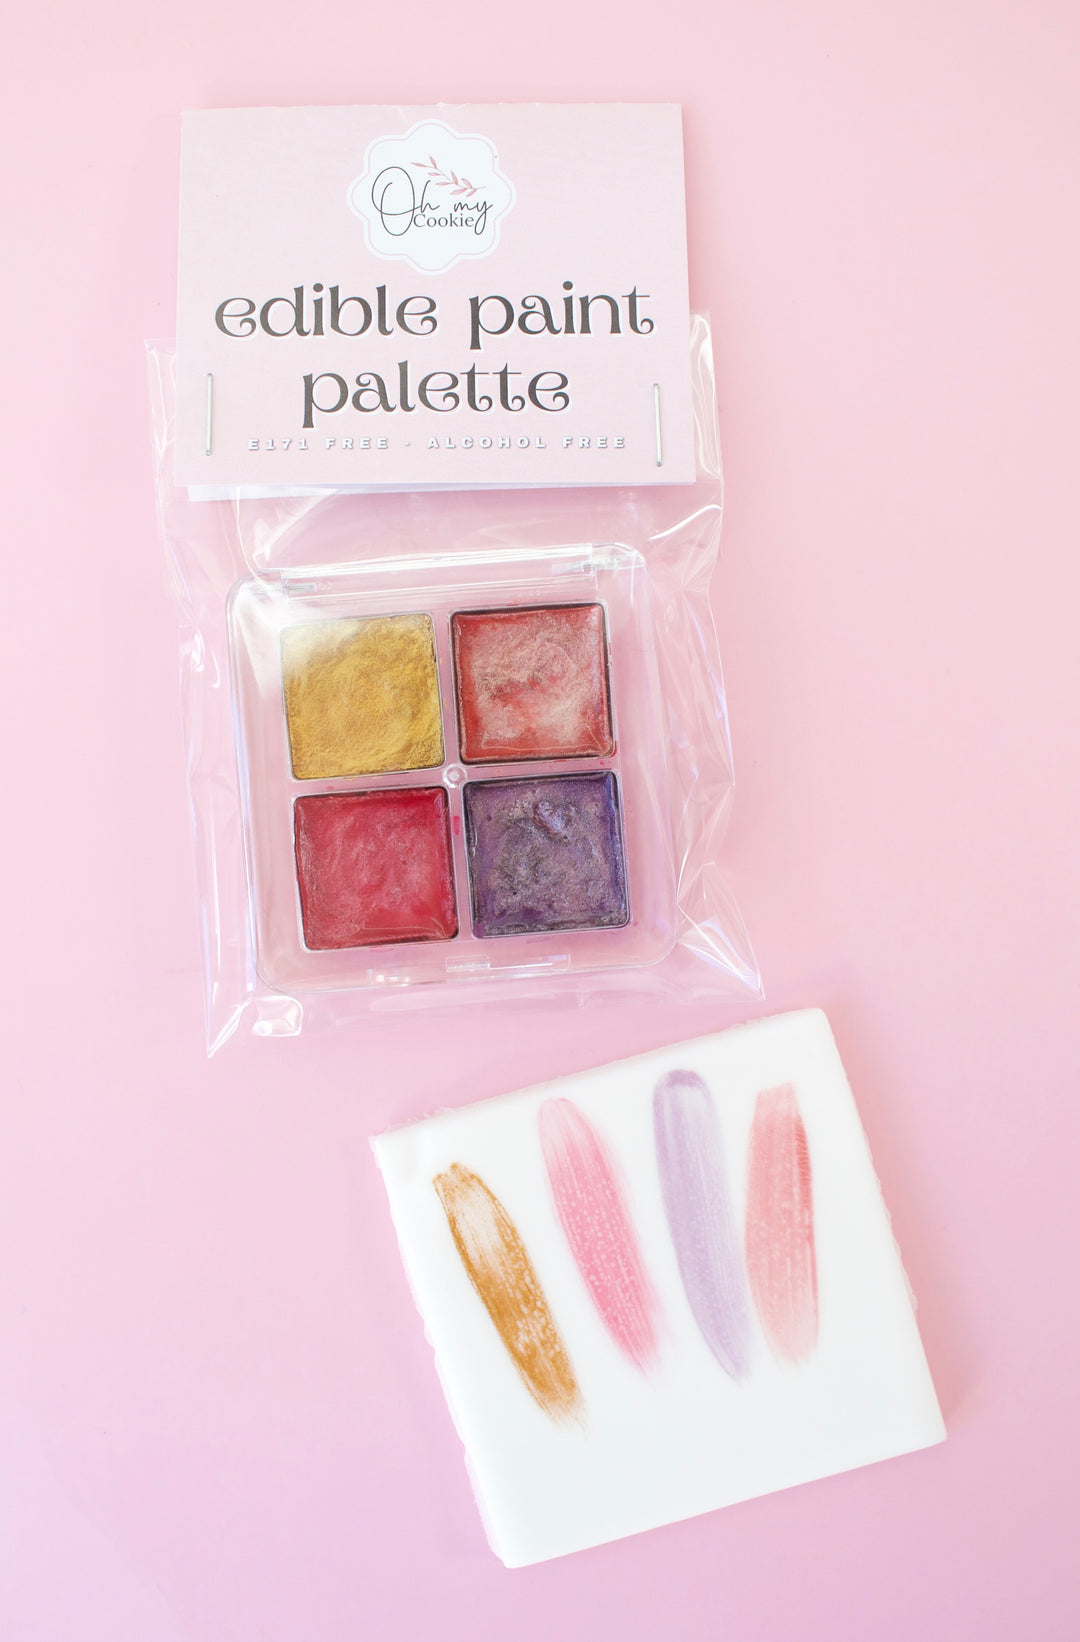 Edible paint palette - Unicorn - Water activated